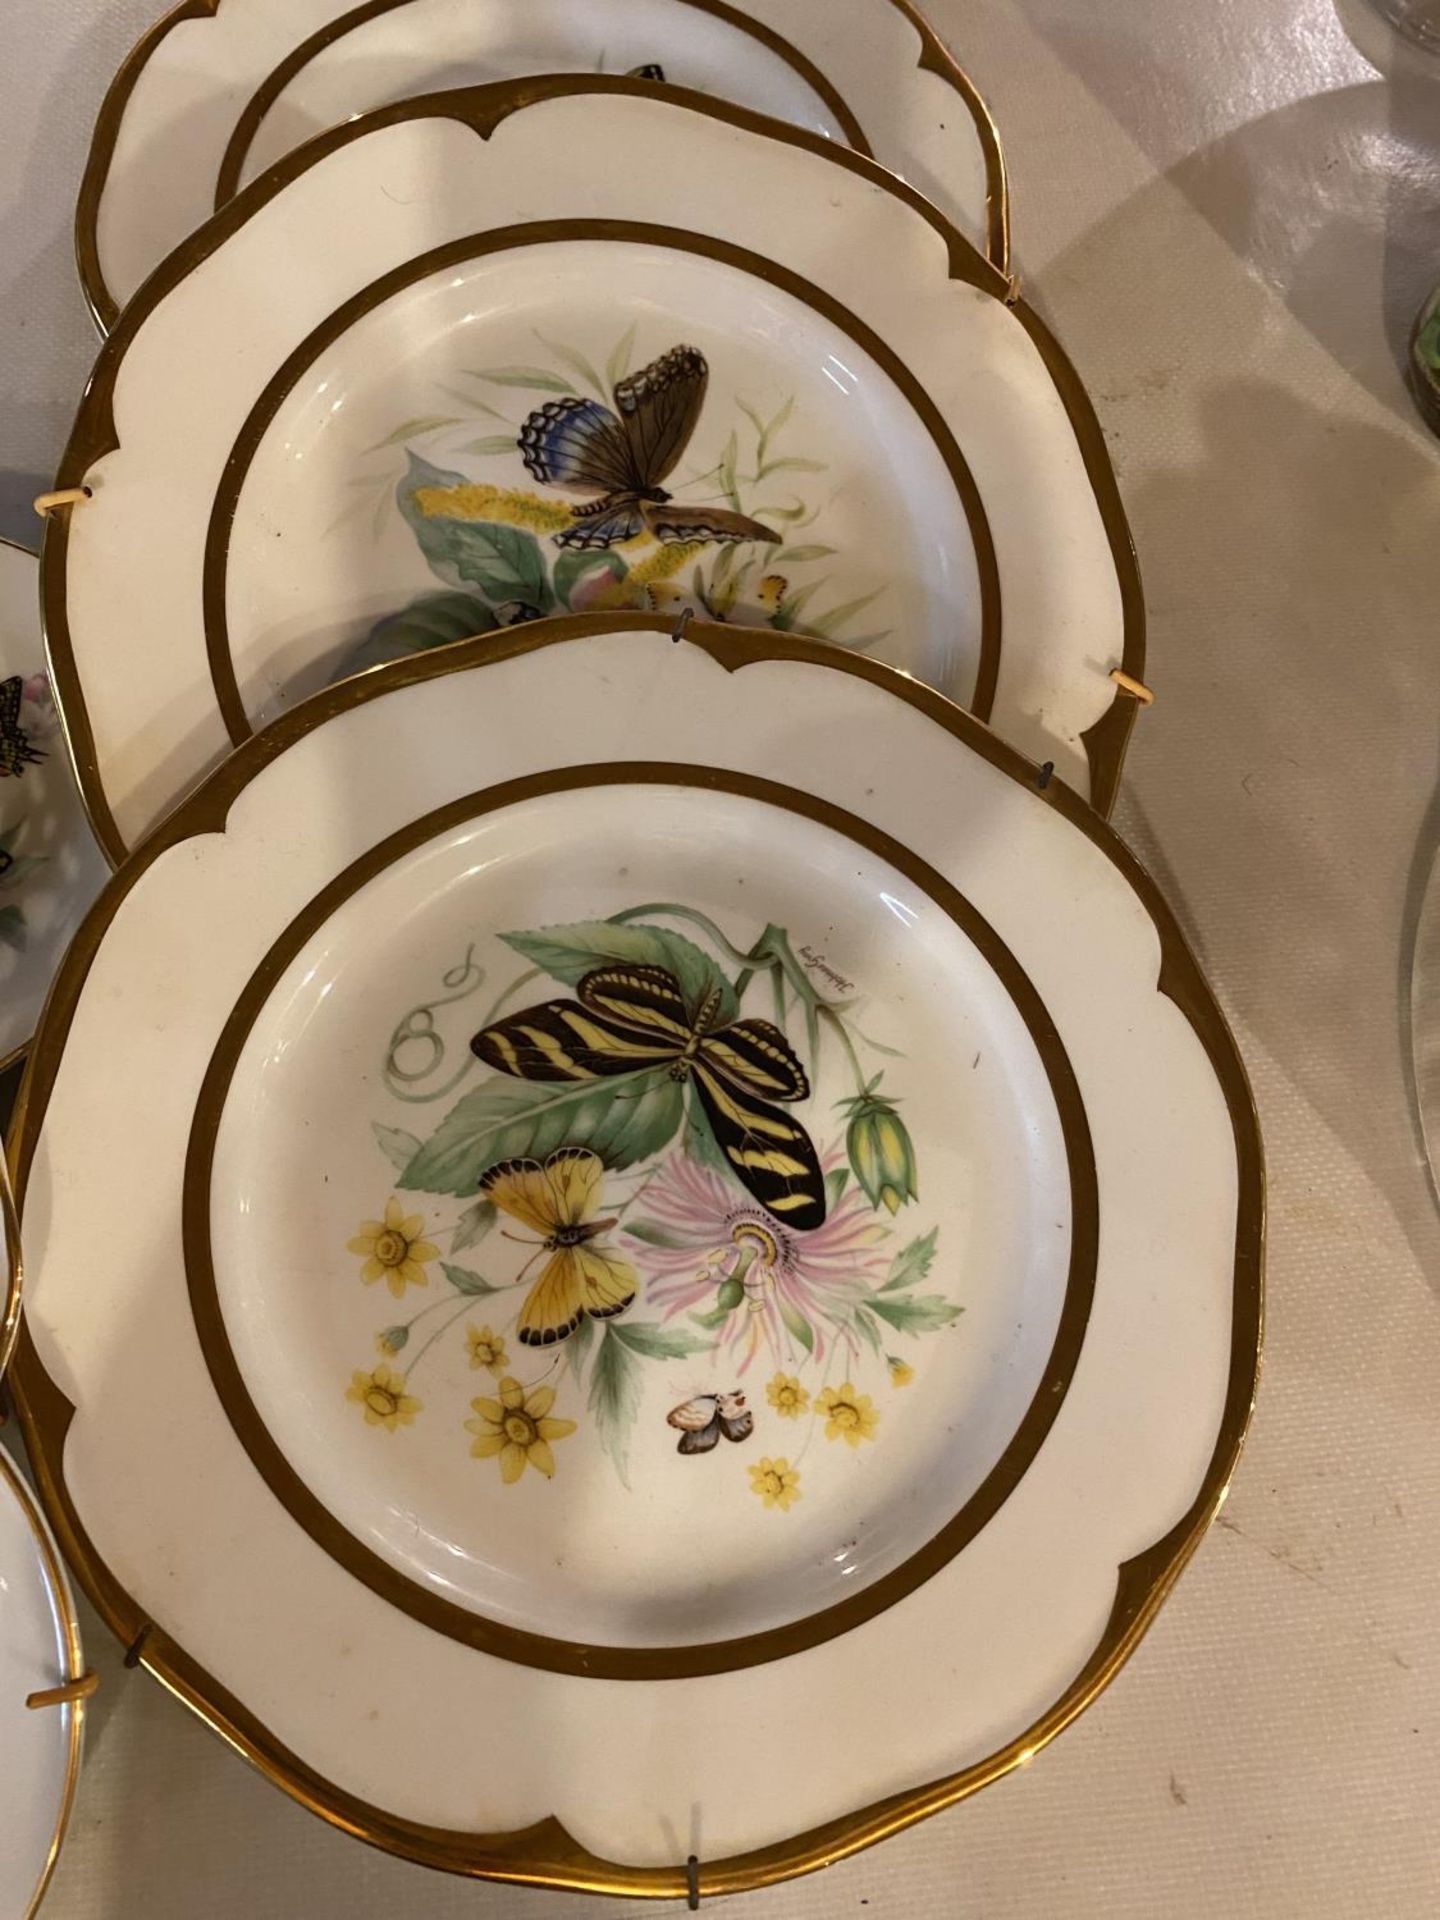 A COLLECTION OF COLLECTORS PLATES FEATURING BIRDS AND BUTTERFLIES - Image 2 of 4